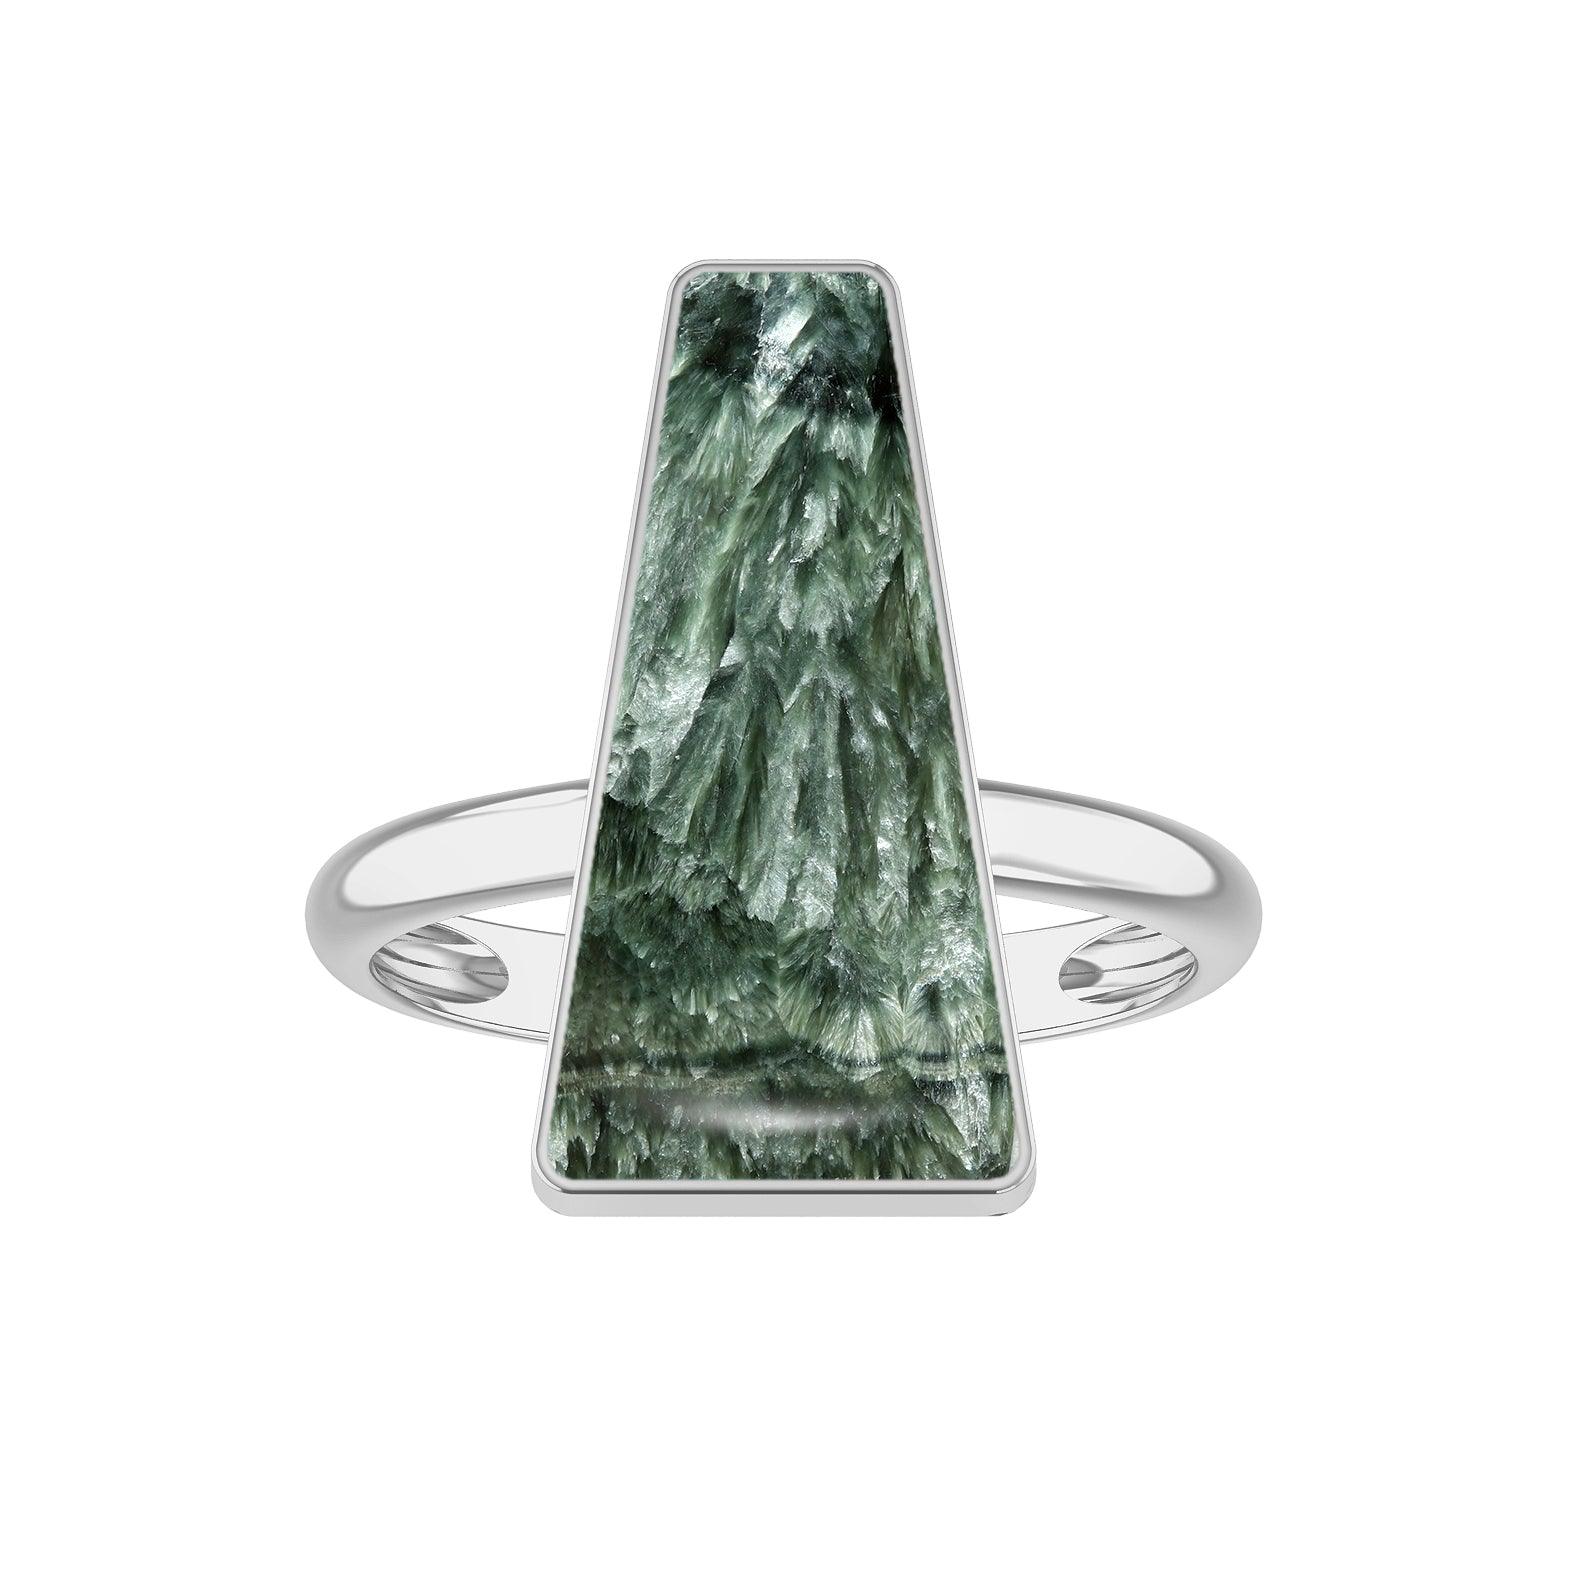 Natural Seraphinite Ring 925 Sterling Silver Bezel Set Handmade jewelry Pack of 6 (Box 8)